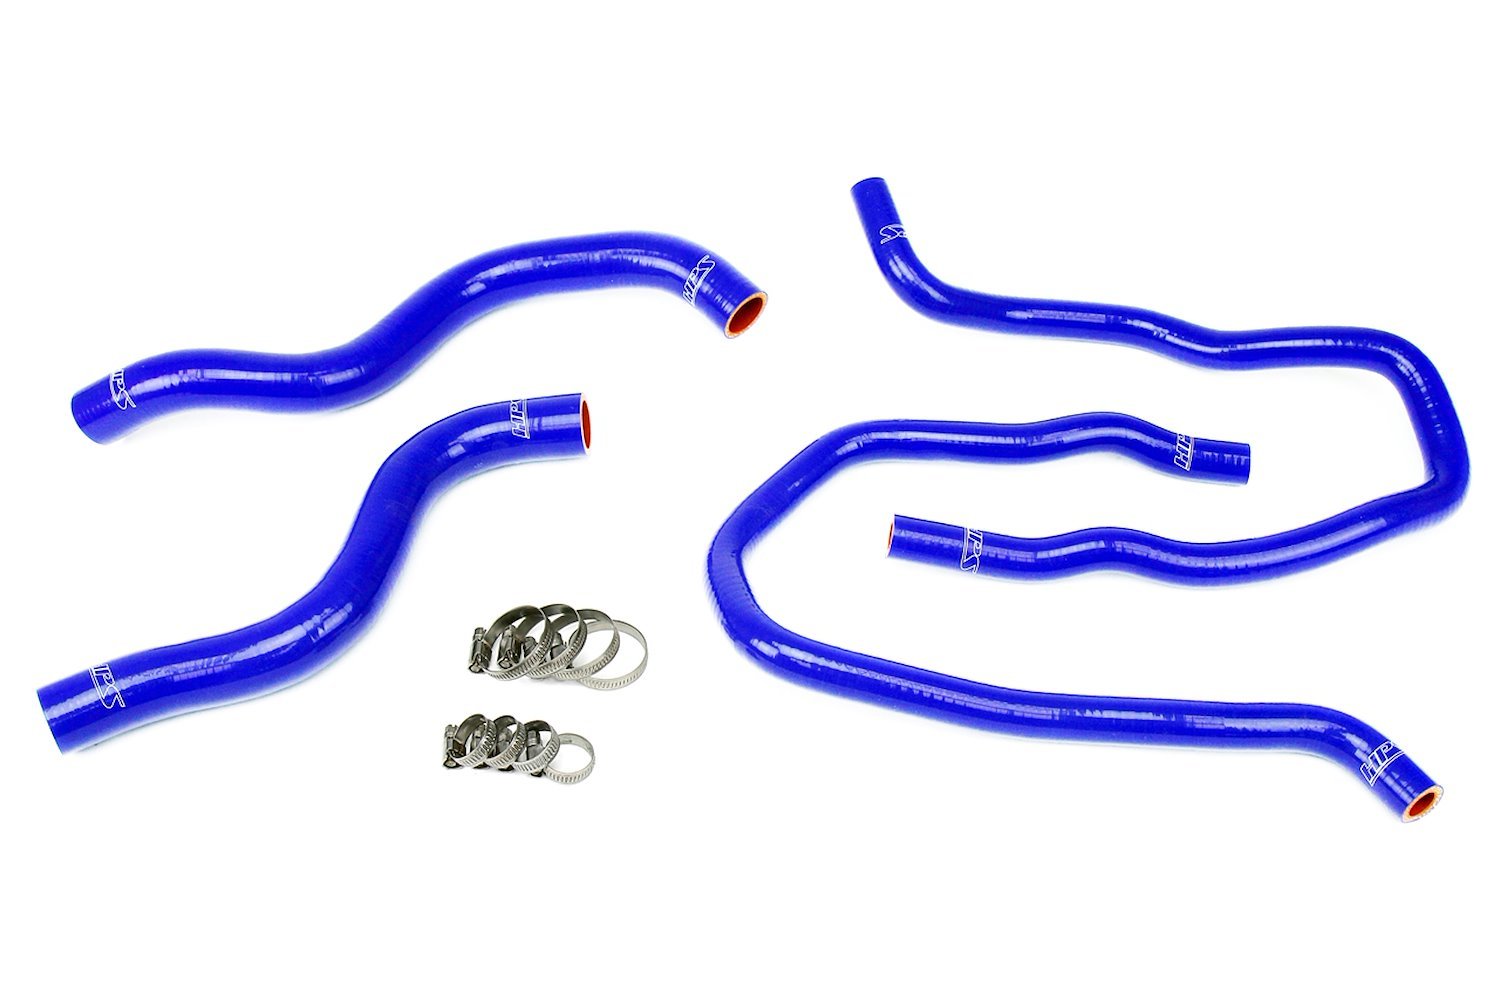 57-1387-BLUE Coolant Hose Kit, High-Temp 3-Ply Reinforced Silicone, Replace Rubber Radiator Heater Coolant Hoses